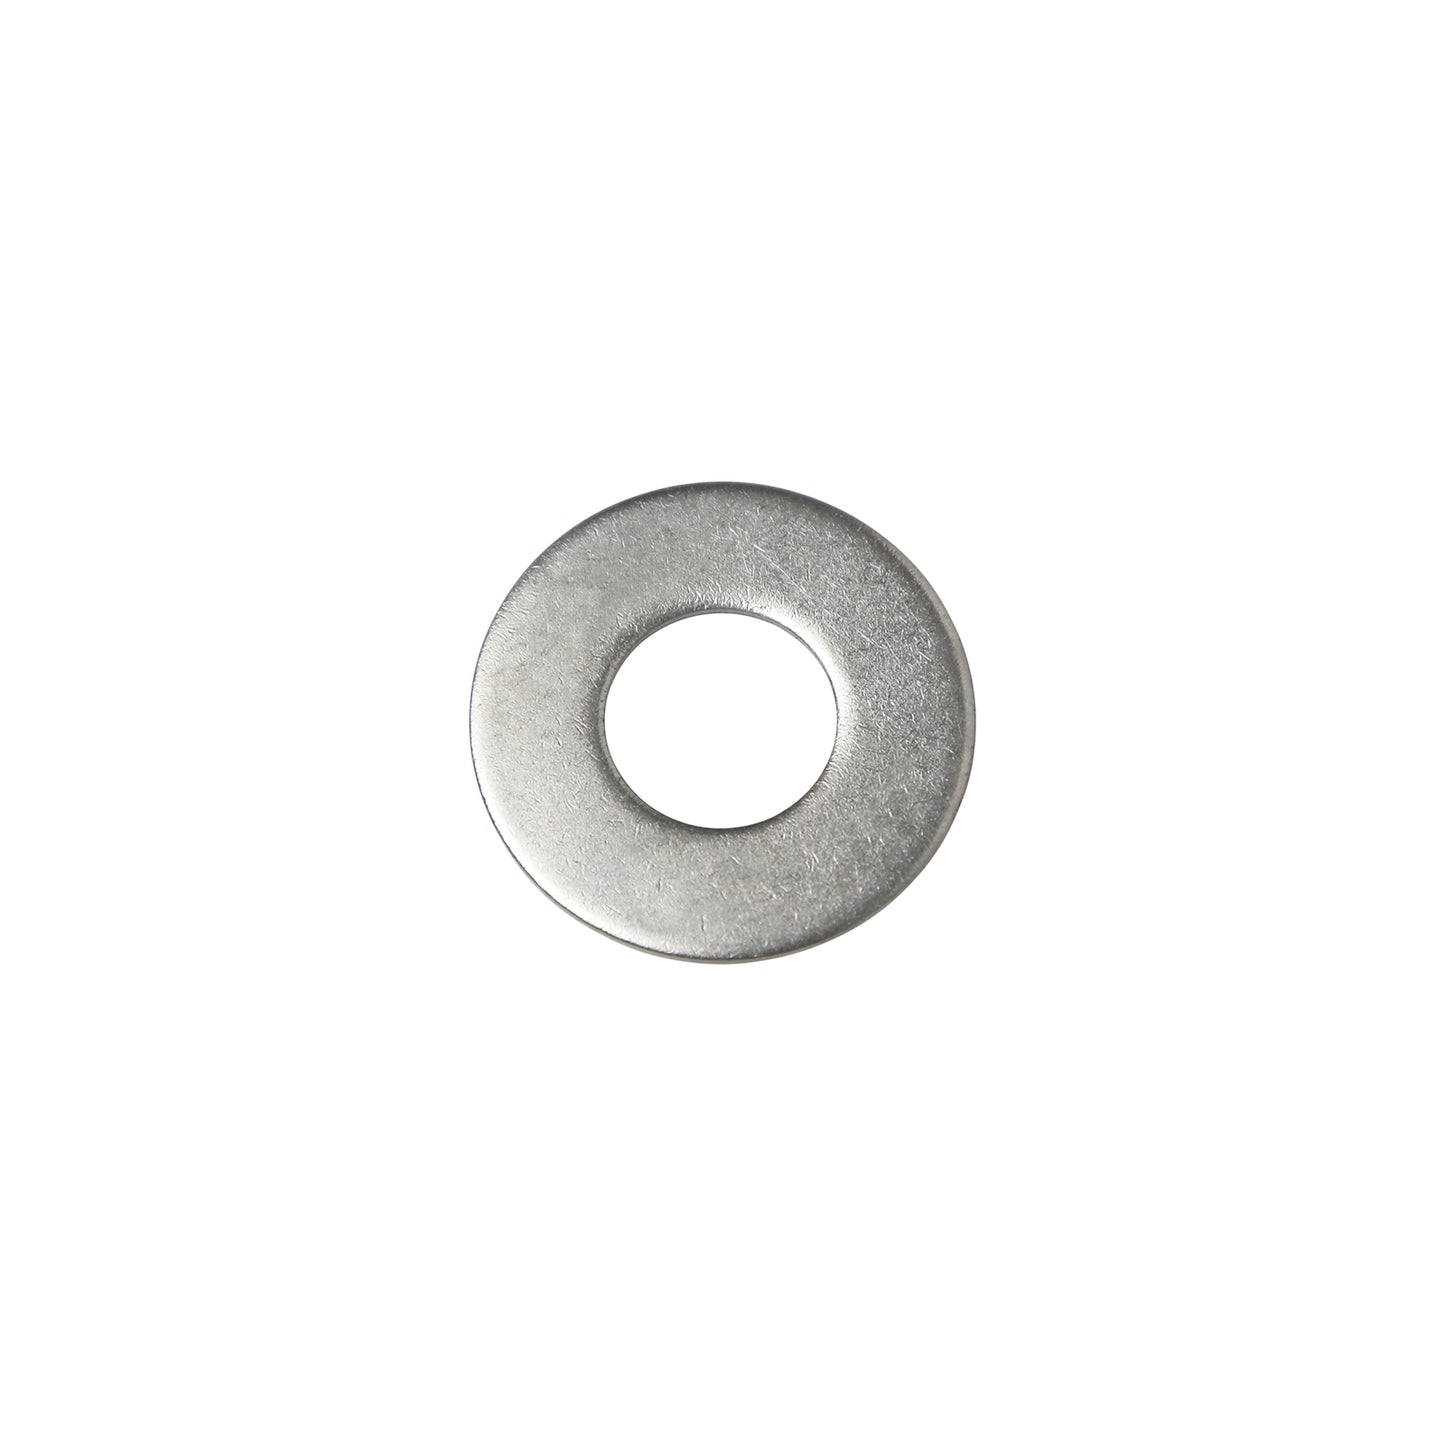 5/8" Conquest USS Flat Washer - 304 Stainless Steel